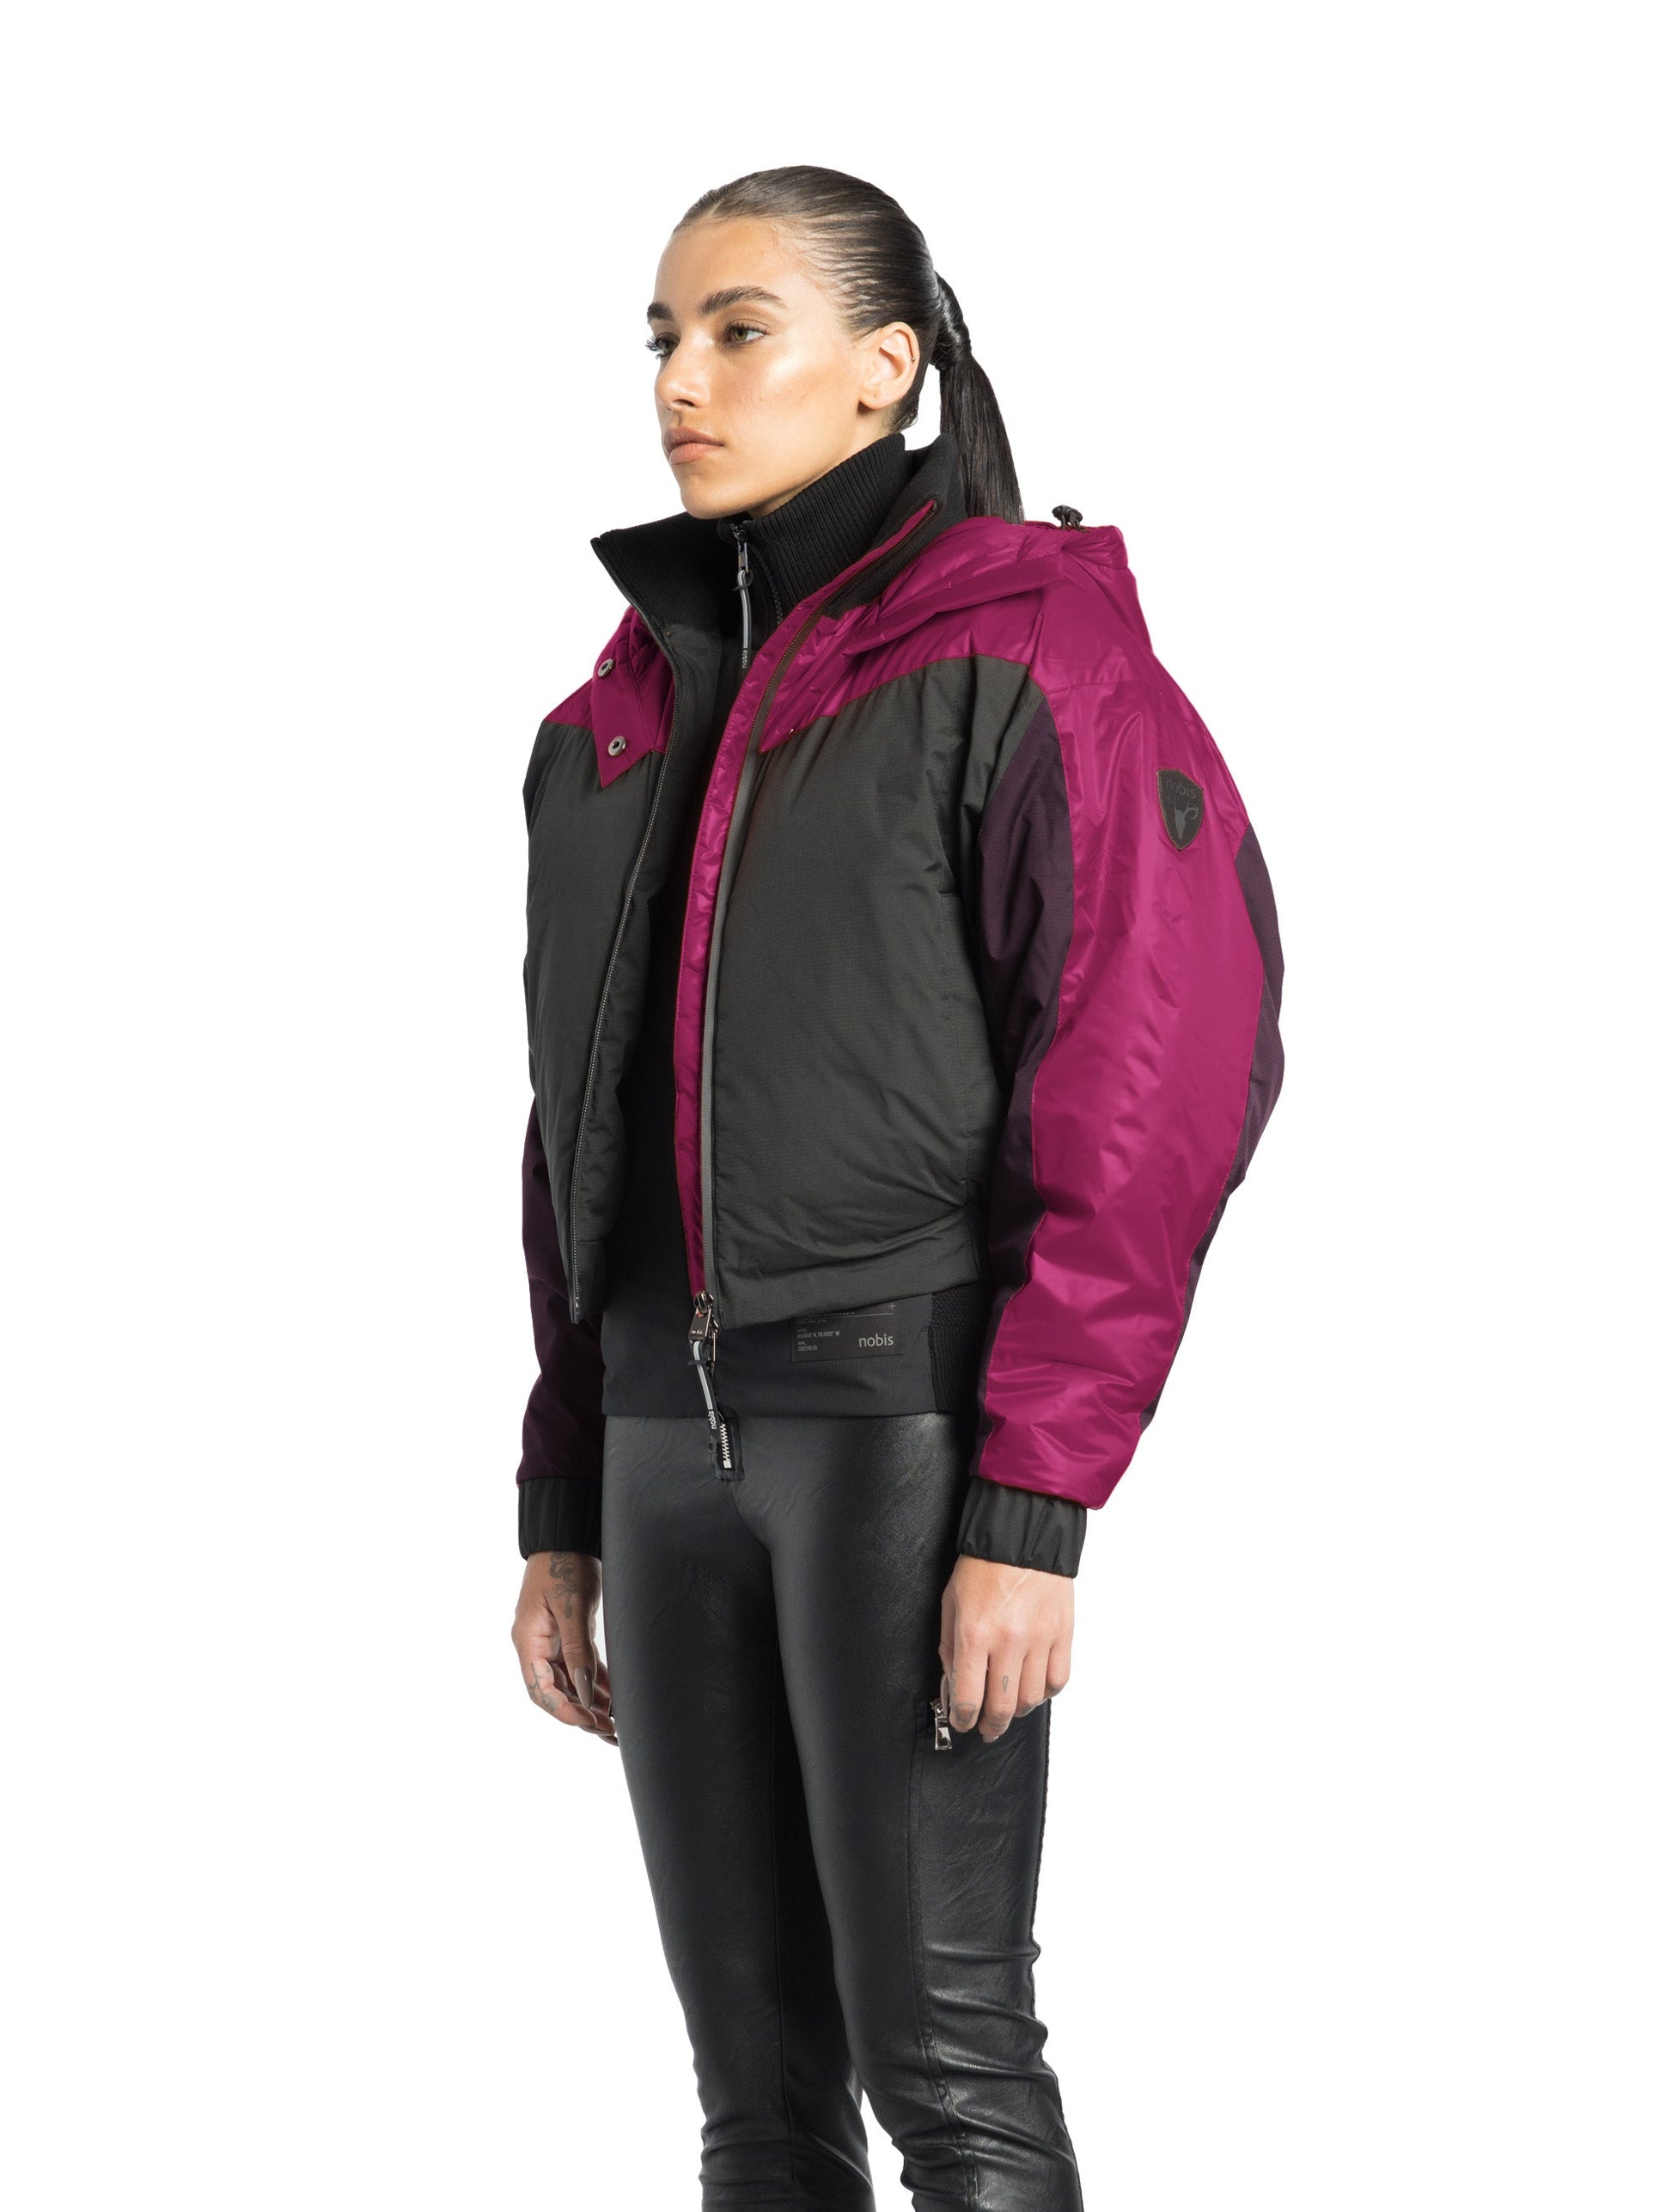 Aspen Women's Batwing Jacket in hip length, premium stretch ripstop and cire technical nylon taffeta fabrication, Premium Canadian White Duck Down insulation, non-removable down-filled hood, centre front two-way zipper, winged arm detailing, in Festival Fushia/Potent Purple